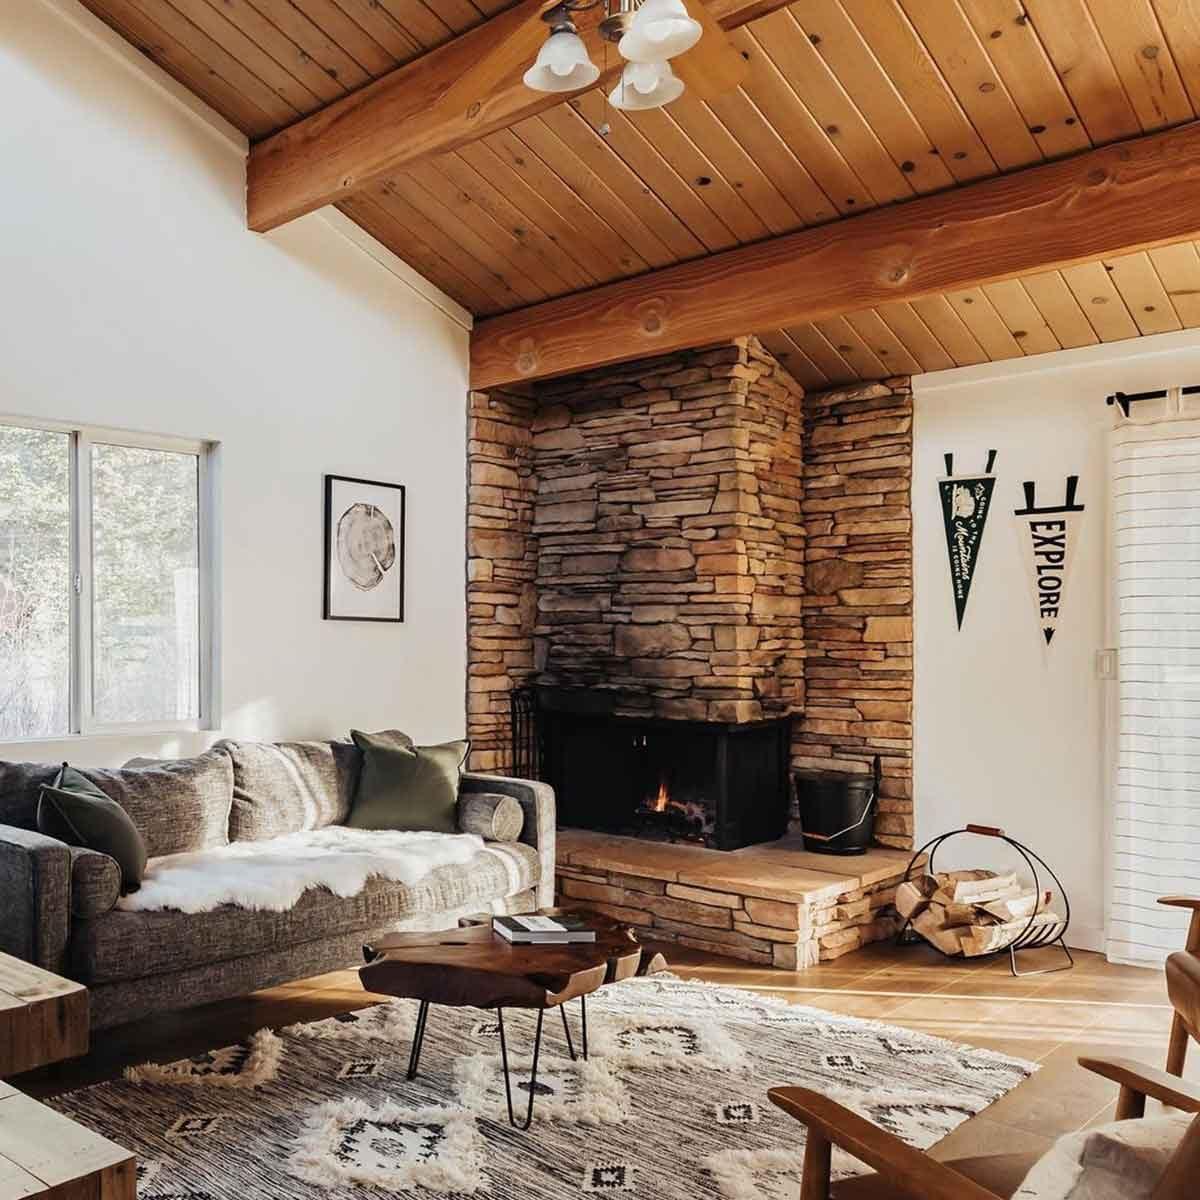 7 Lodge Decor Ideas To Make Your Home Feel Like A Cozy Cabin